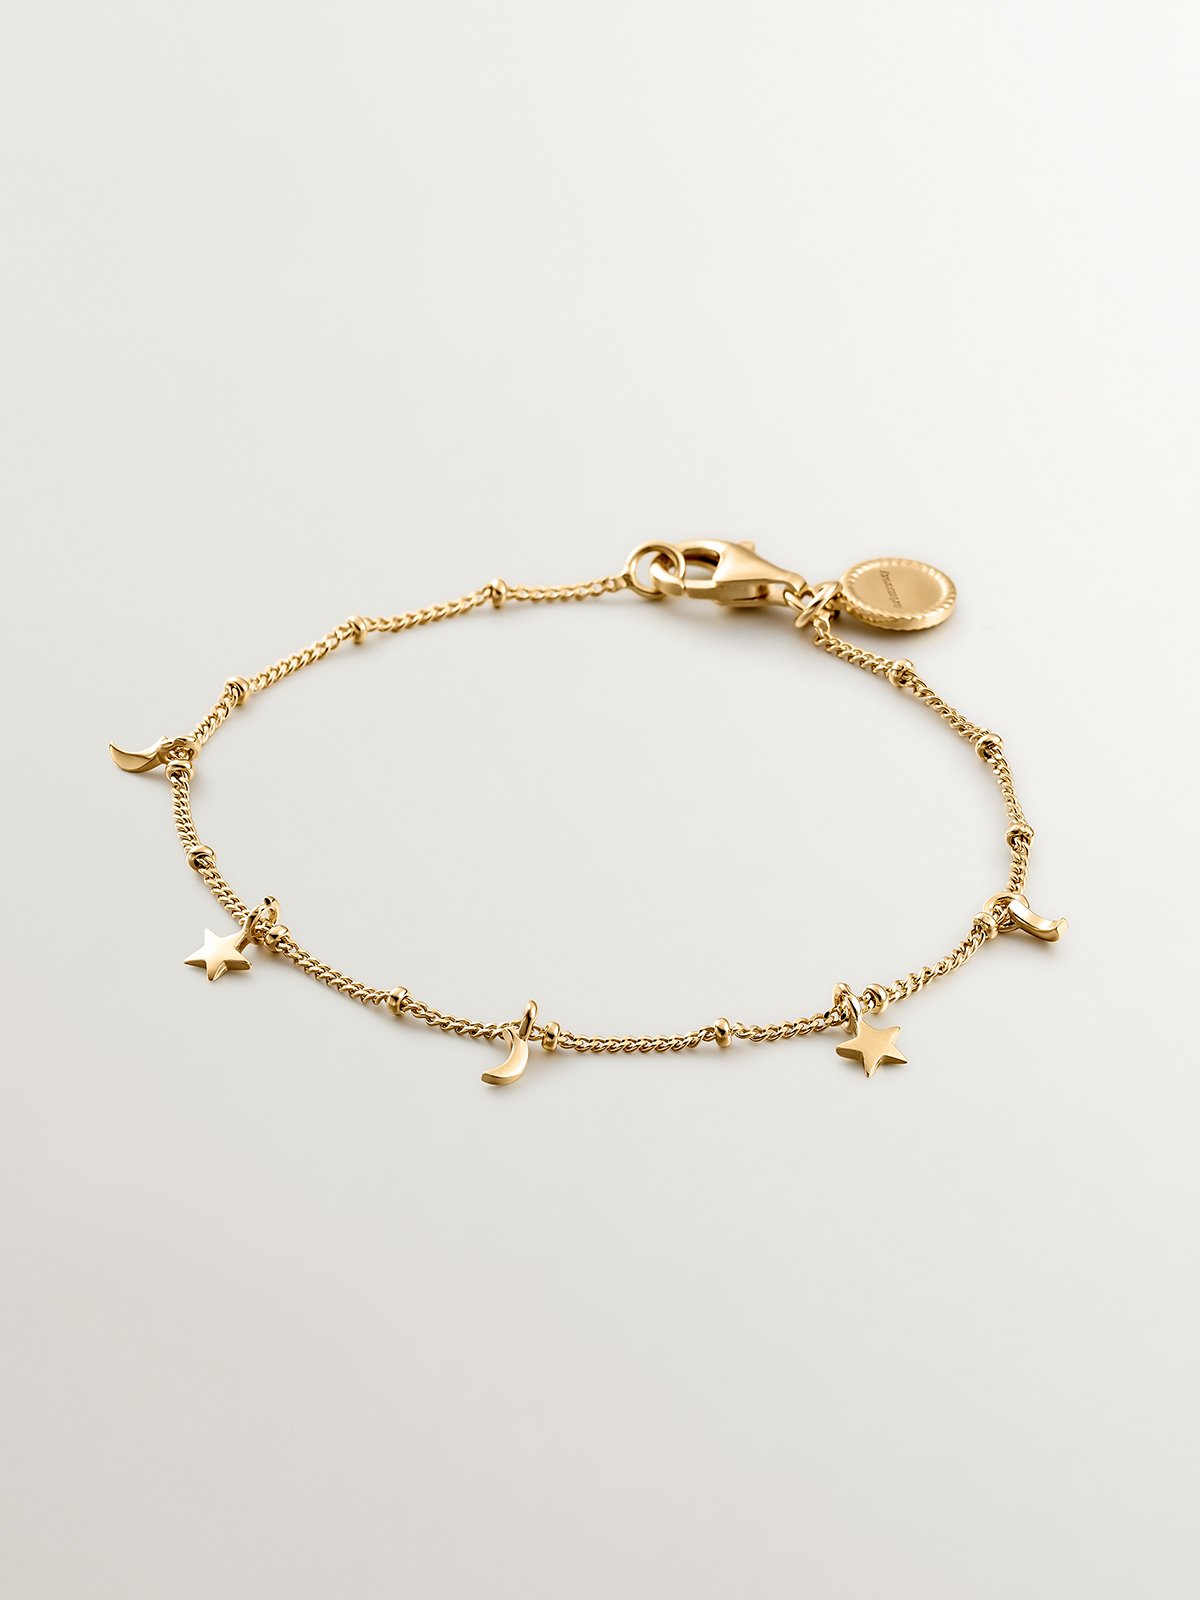 925 Silver bracelet bathed in 18K yellow gold with moons and stars.